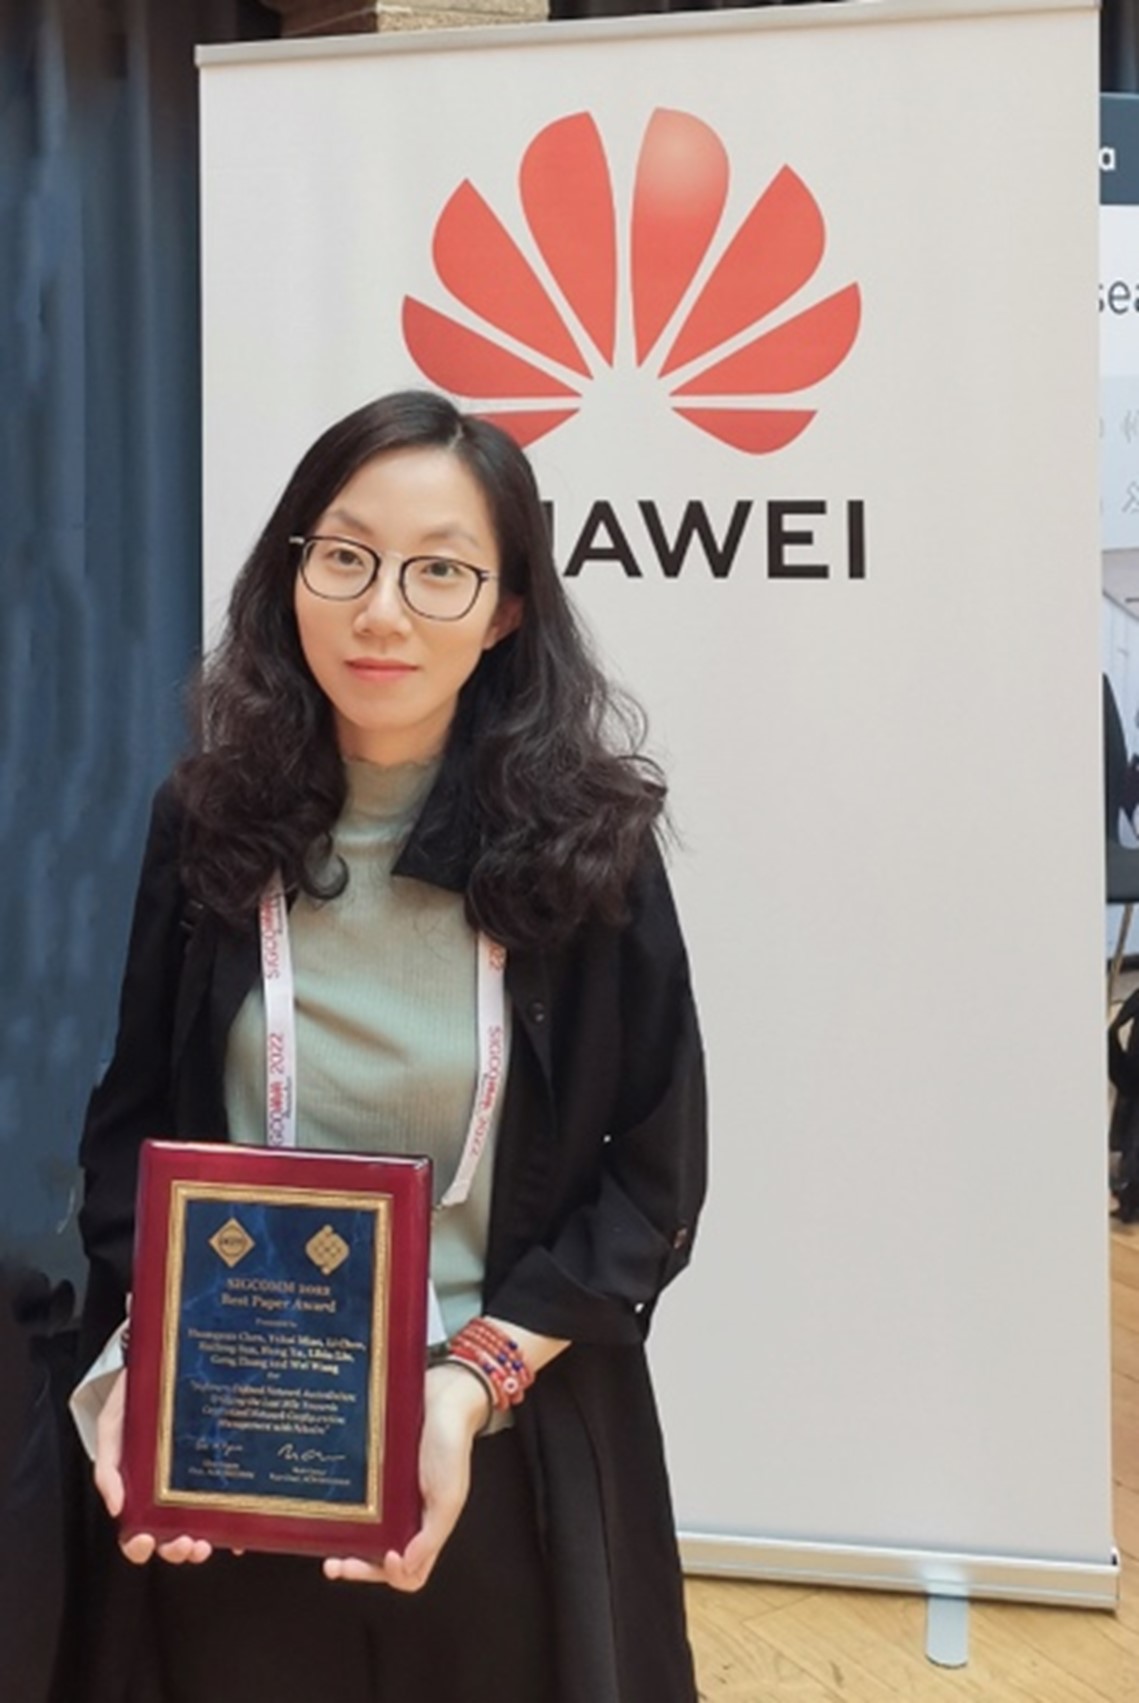 Dr. Huangxun CHEN, the first author of the award-winning paper, was a 2020 Ph.D. graduate of the CSE department supervised by Prof. Qian ZHANG and is currently a researcher at Huawei Hong Kong Research Center.